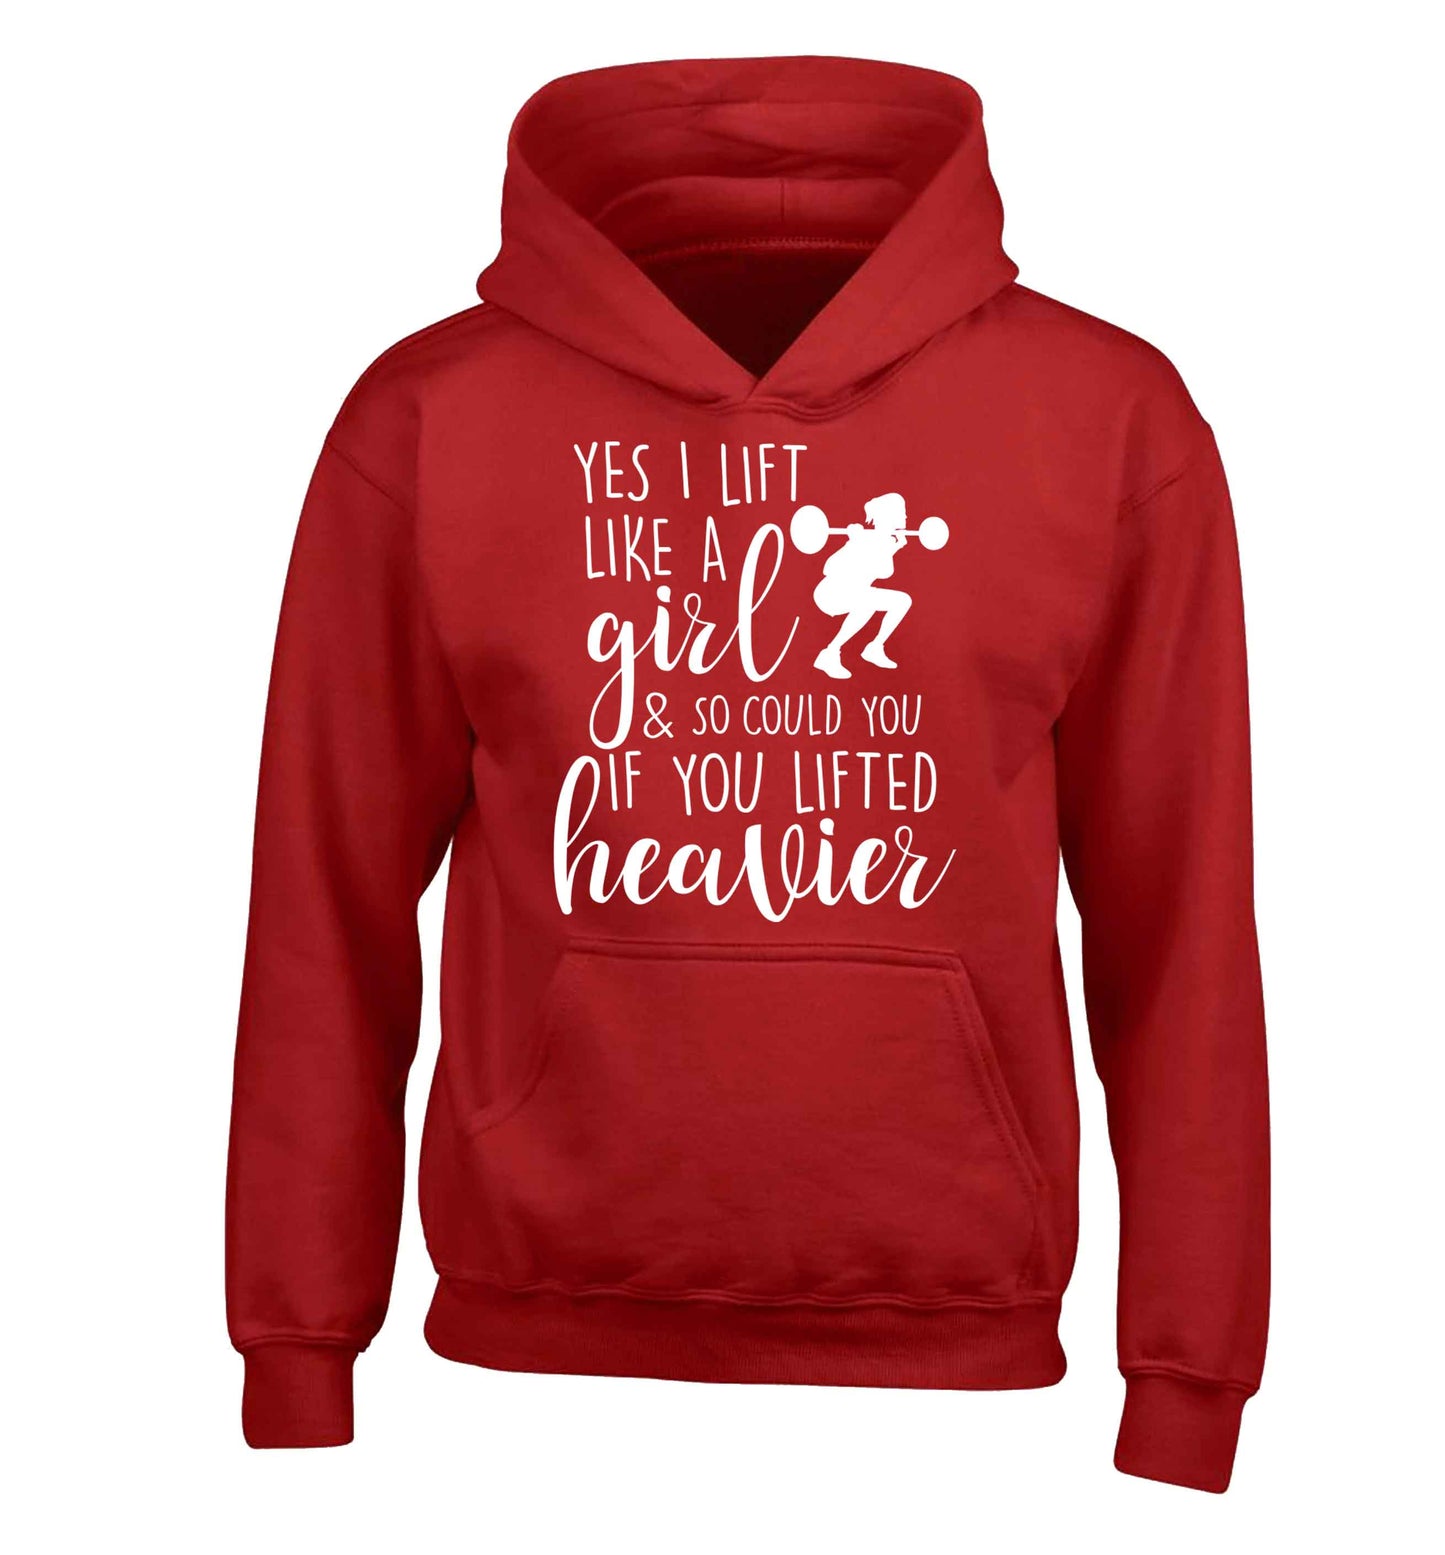 Yes I lift like a girl and so could you if you lifted heavier children's red hoodie 12-13 Years